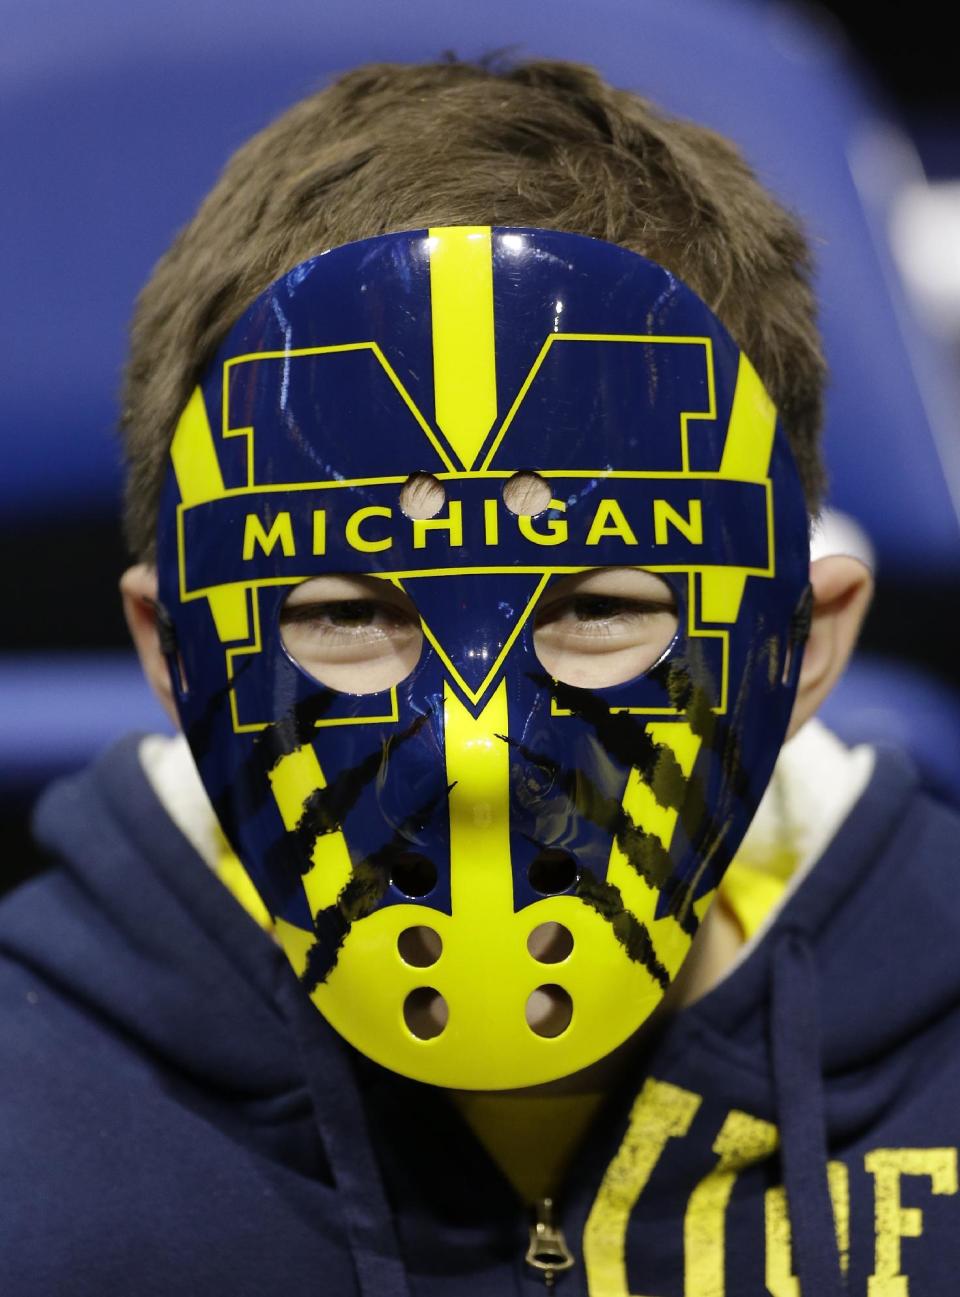 A Michigan fan gets ready for the start of an NCAA Midwest Regional semifinal college basketball tournament game against the Tennessee Friday, March 28, 2014, in Indianapolis. (AP Photo/David J. Phillip)